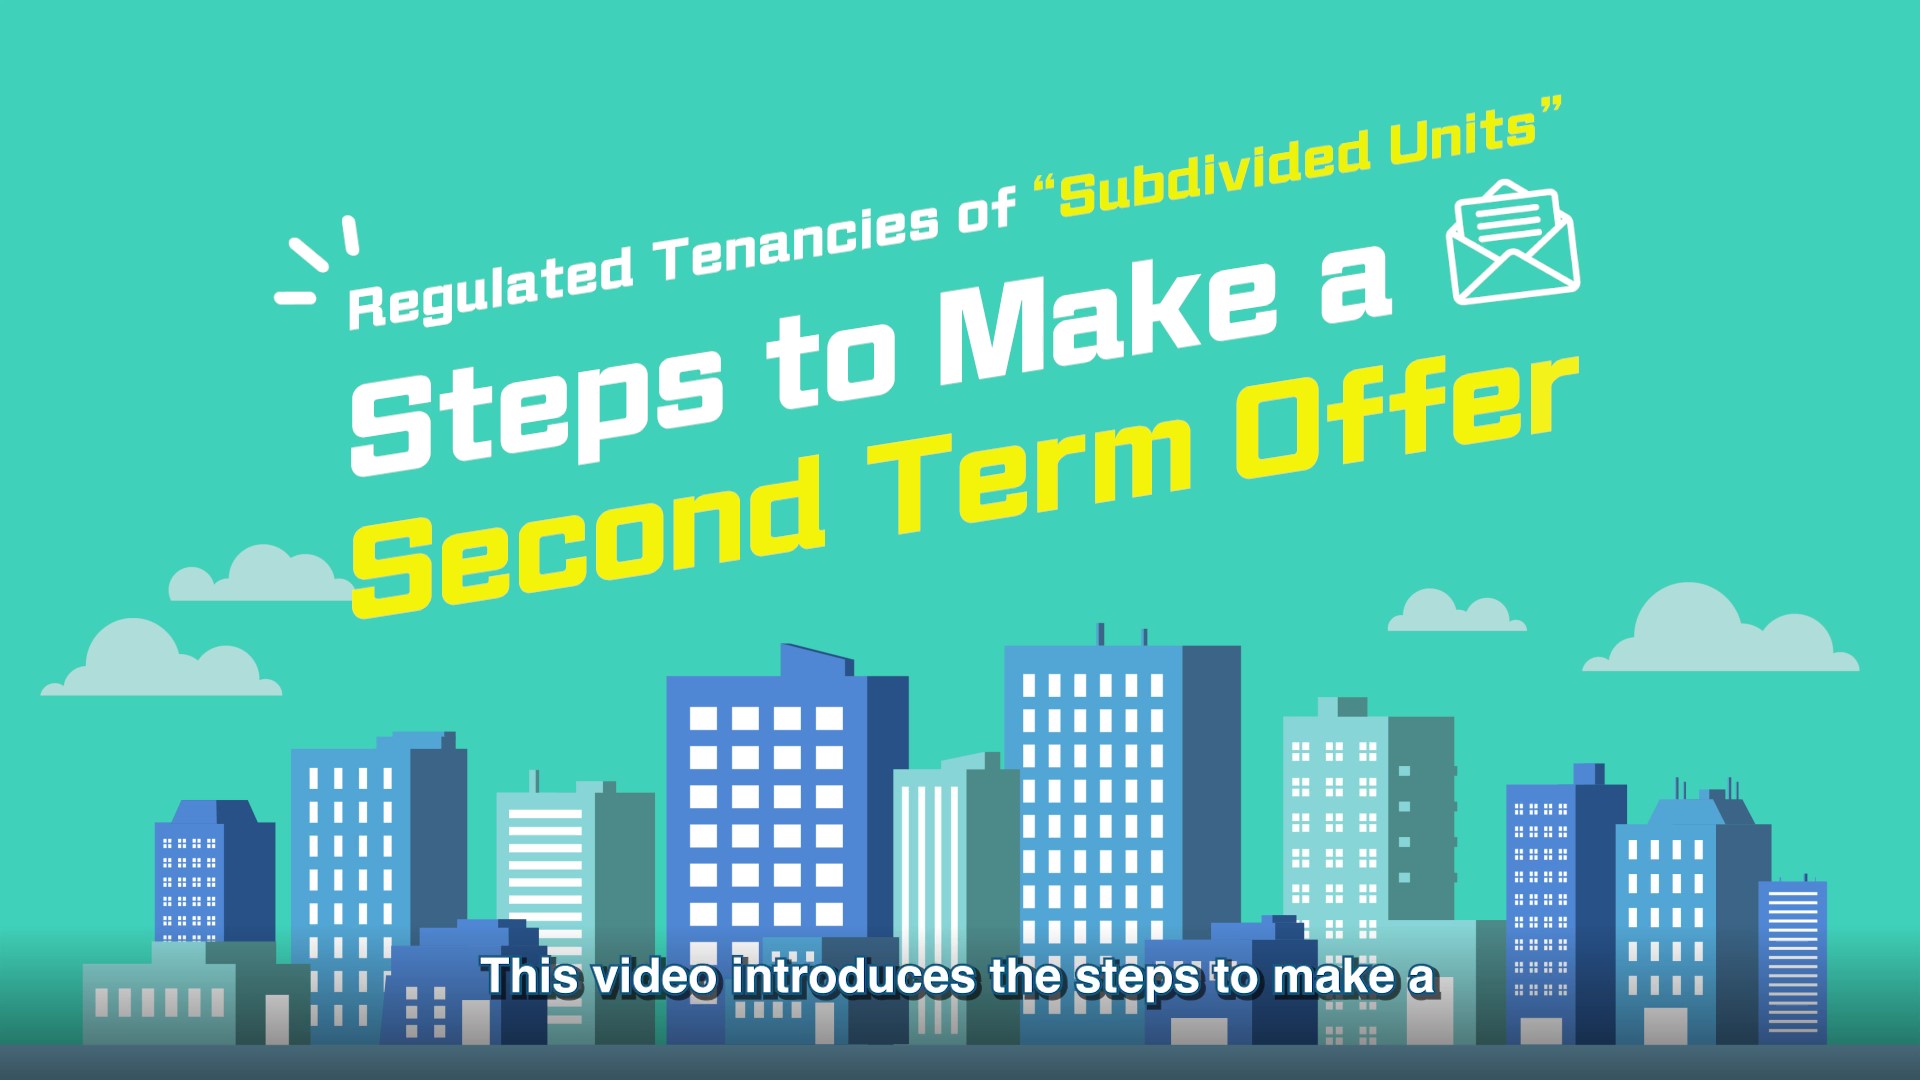 Tutorial video – Regulated Tenancies of Subdivided Units Steps to Make a Second Term Offer